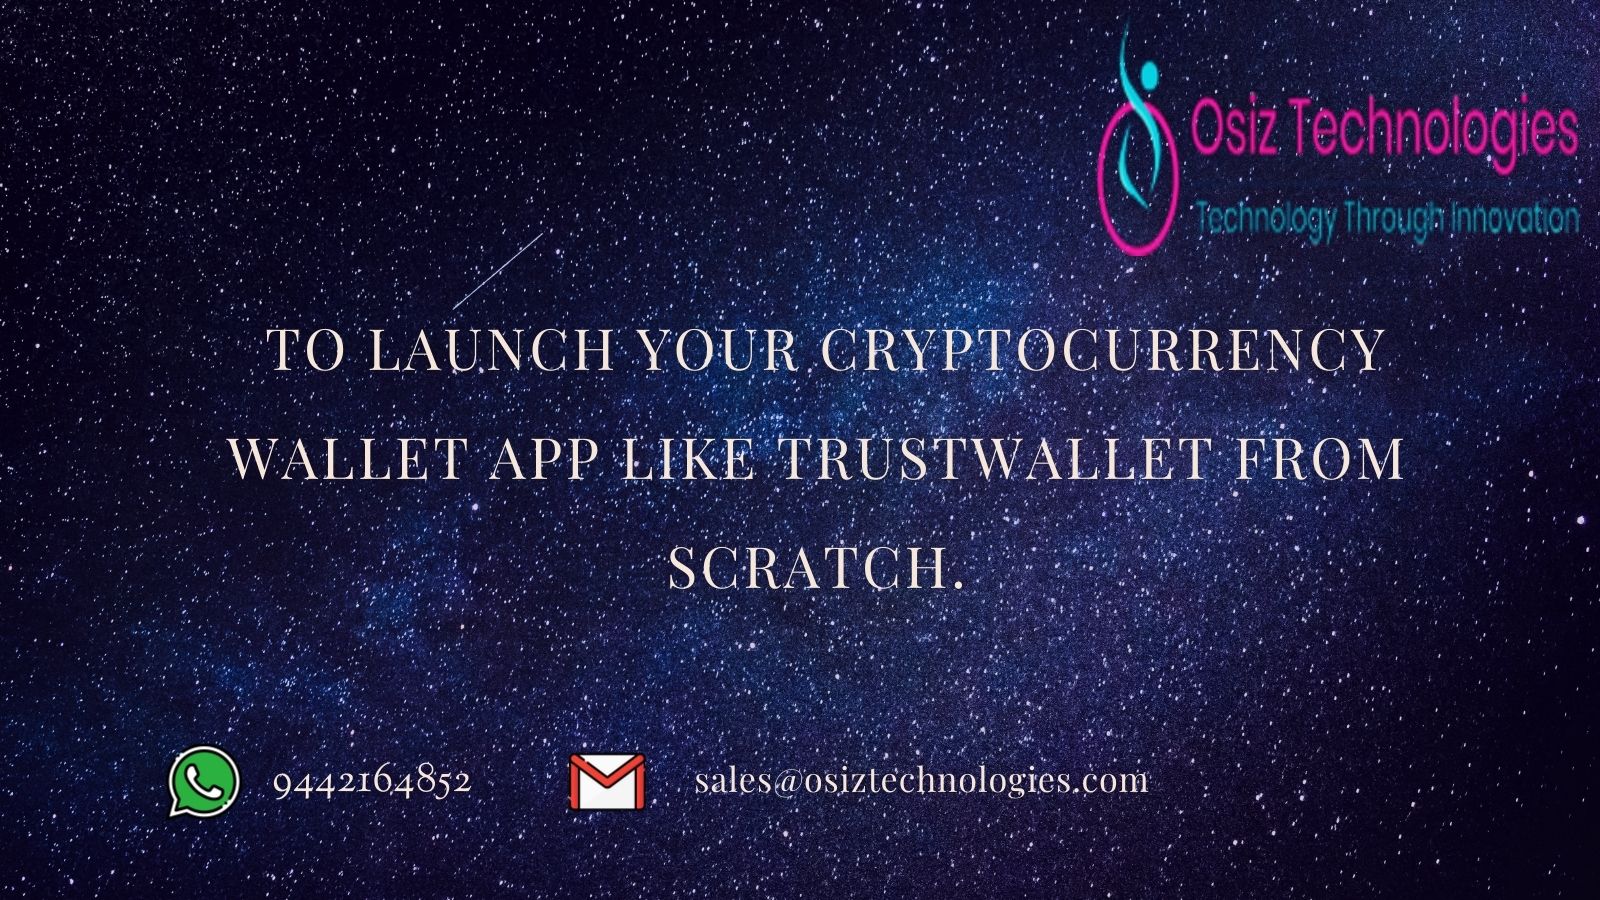 Article about To Launch your Cryptocurrency Wallet App Like Trustwallet from Scratch.